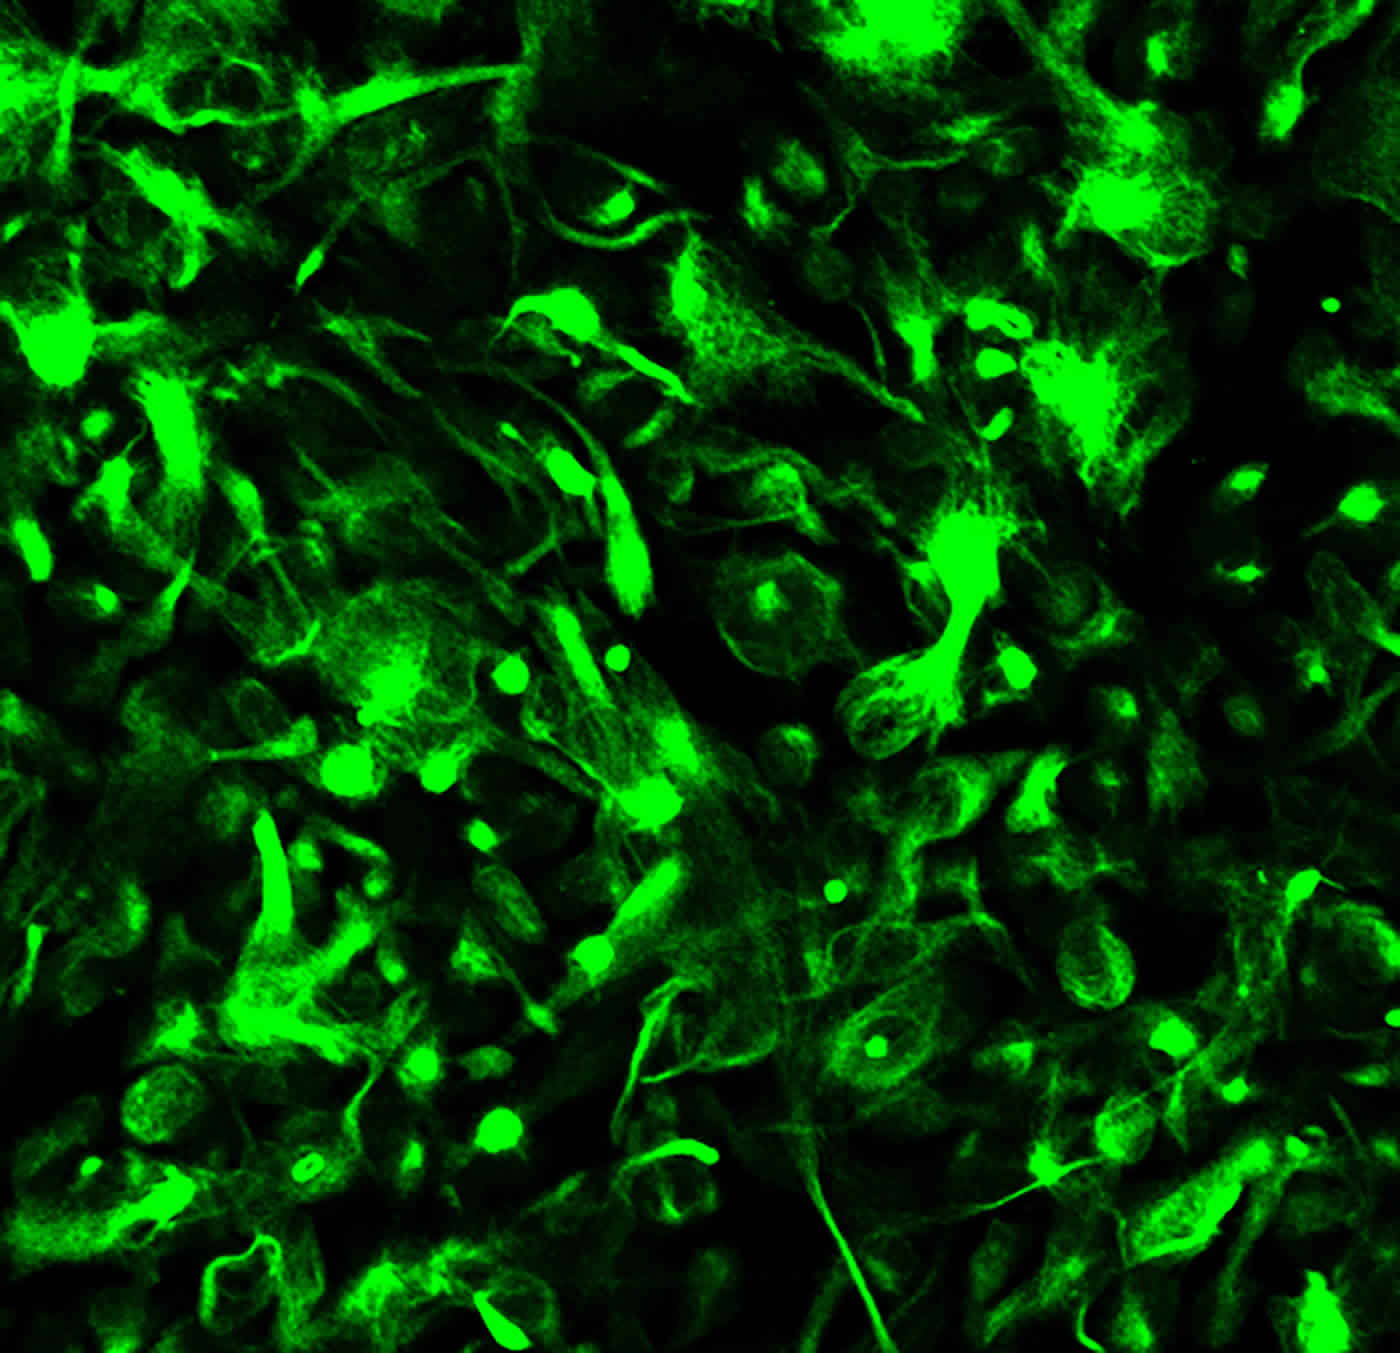 Image shows astroglial cells.